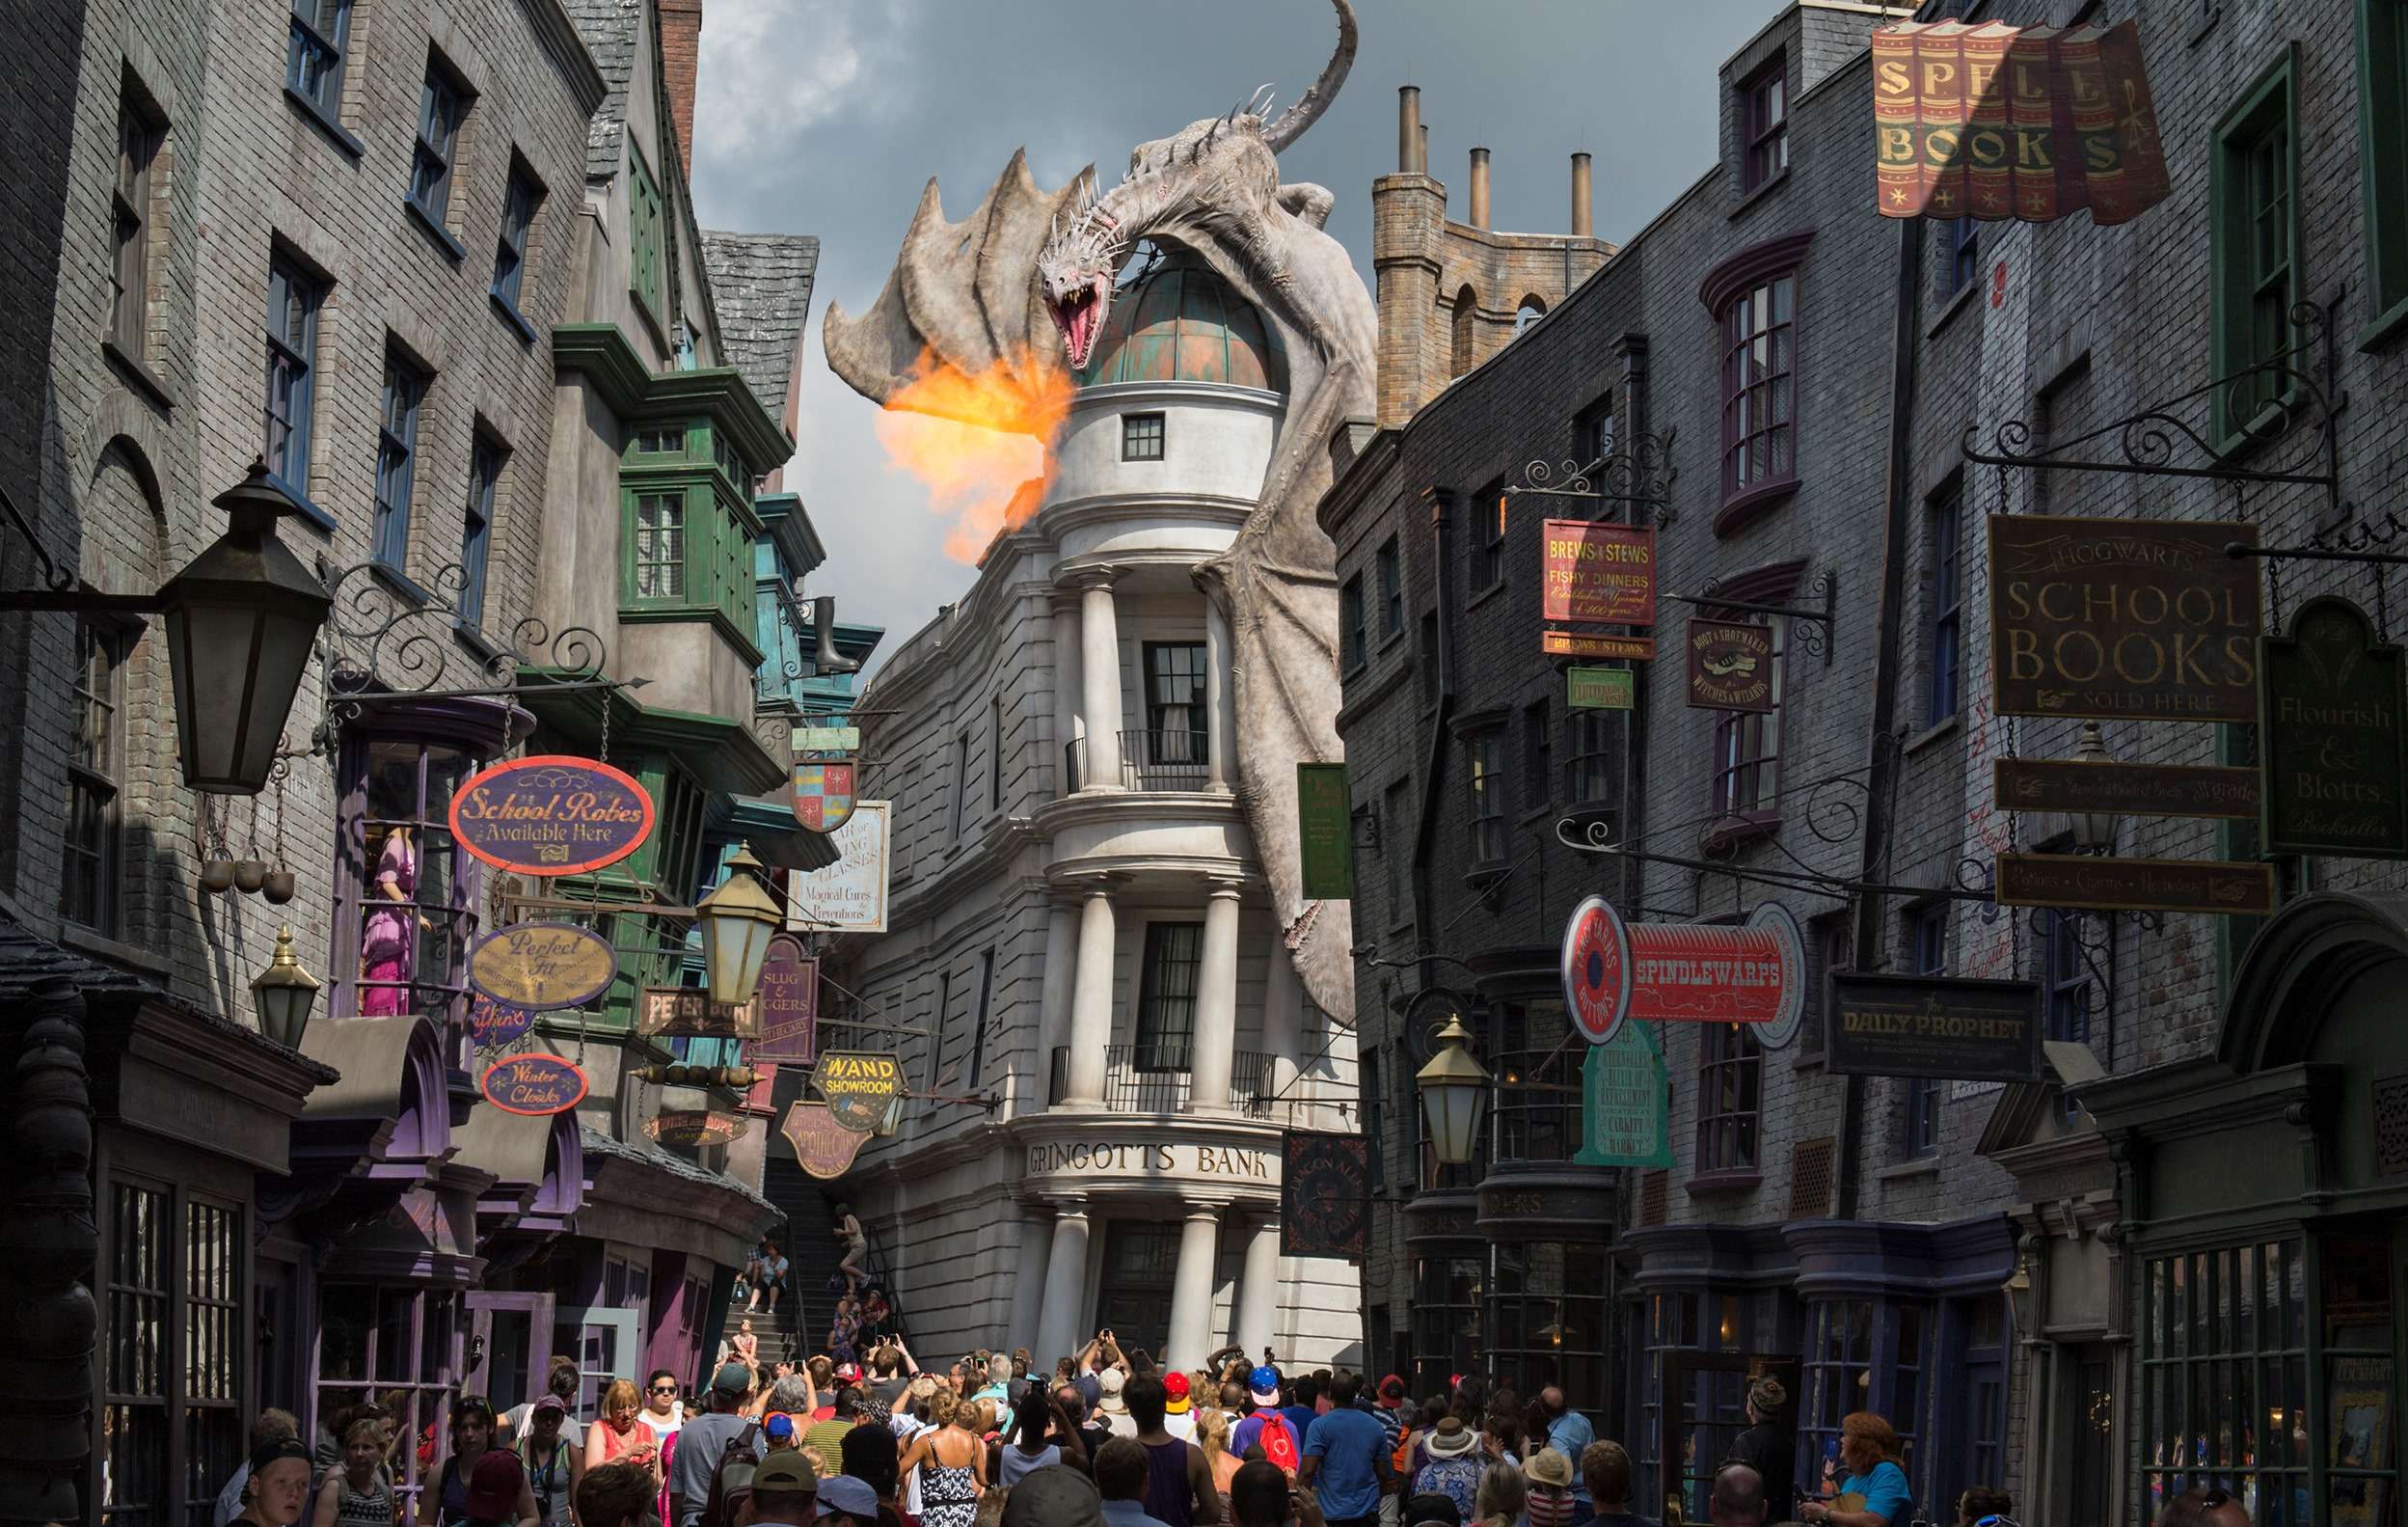 One day Itinerary for visiting Harry Potter at Universal Studios